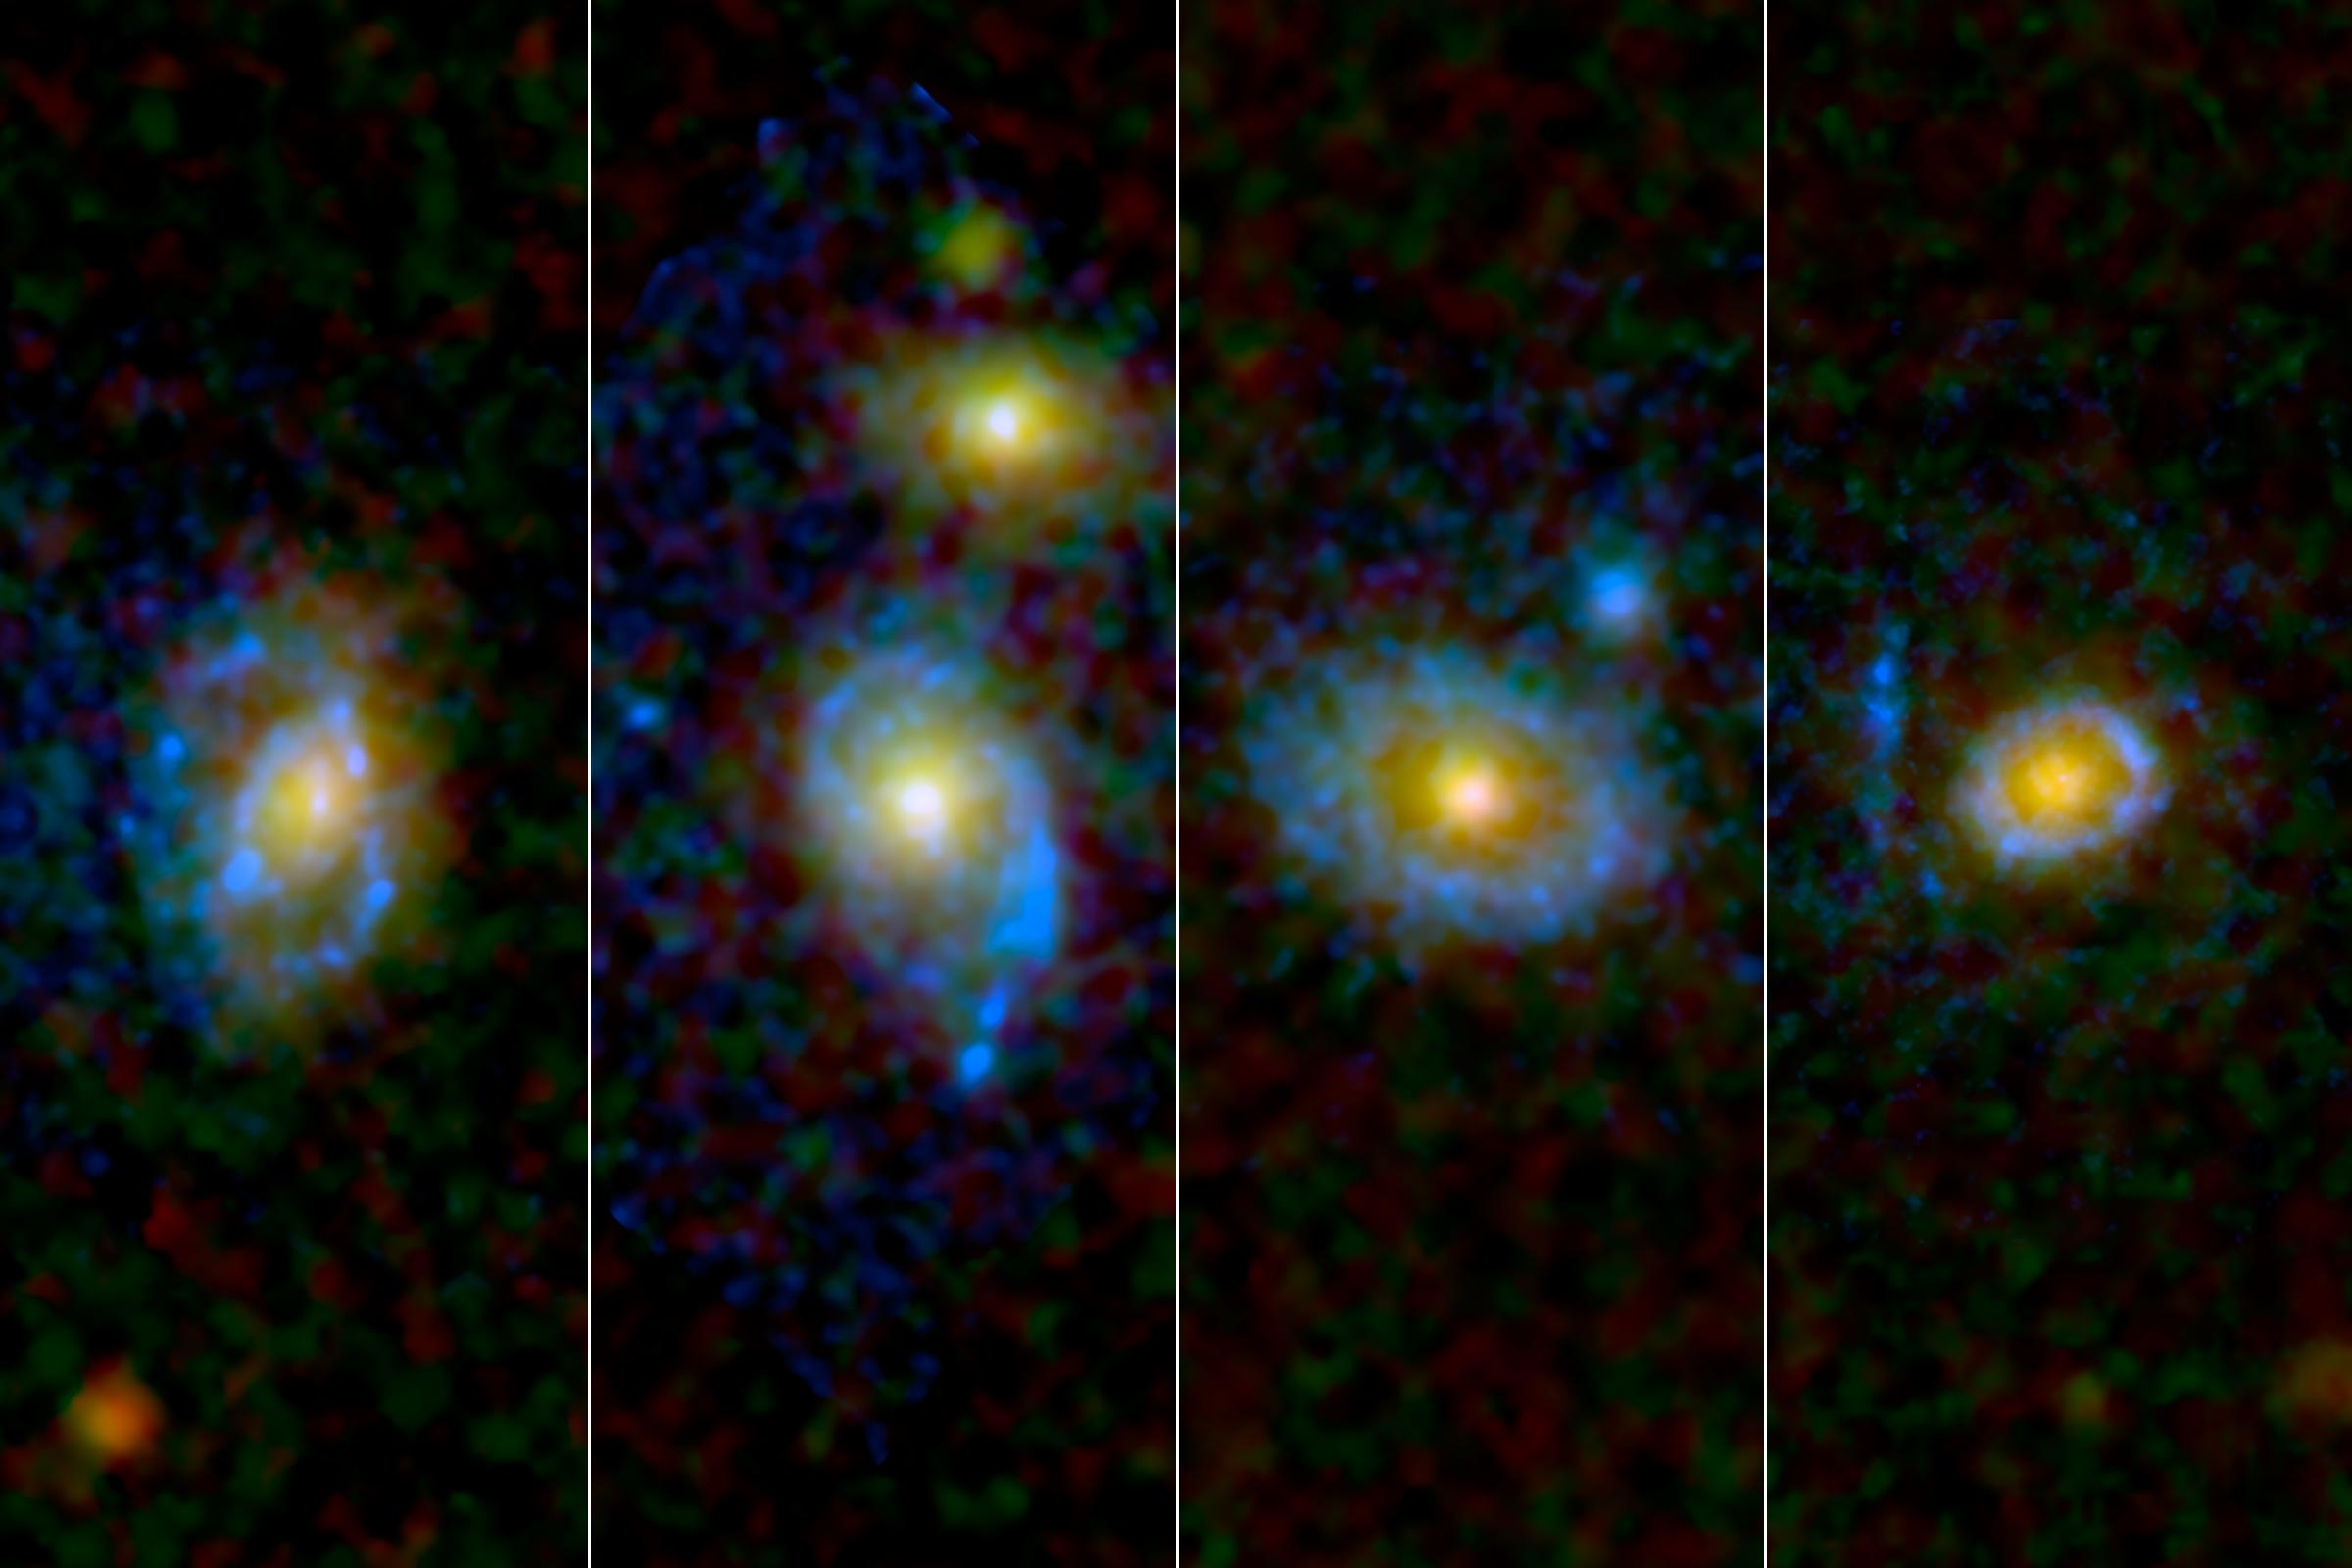 New, long-exposure Hubble Space Telescope images of elliptical galaxies show a surprising amount of new star formation.